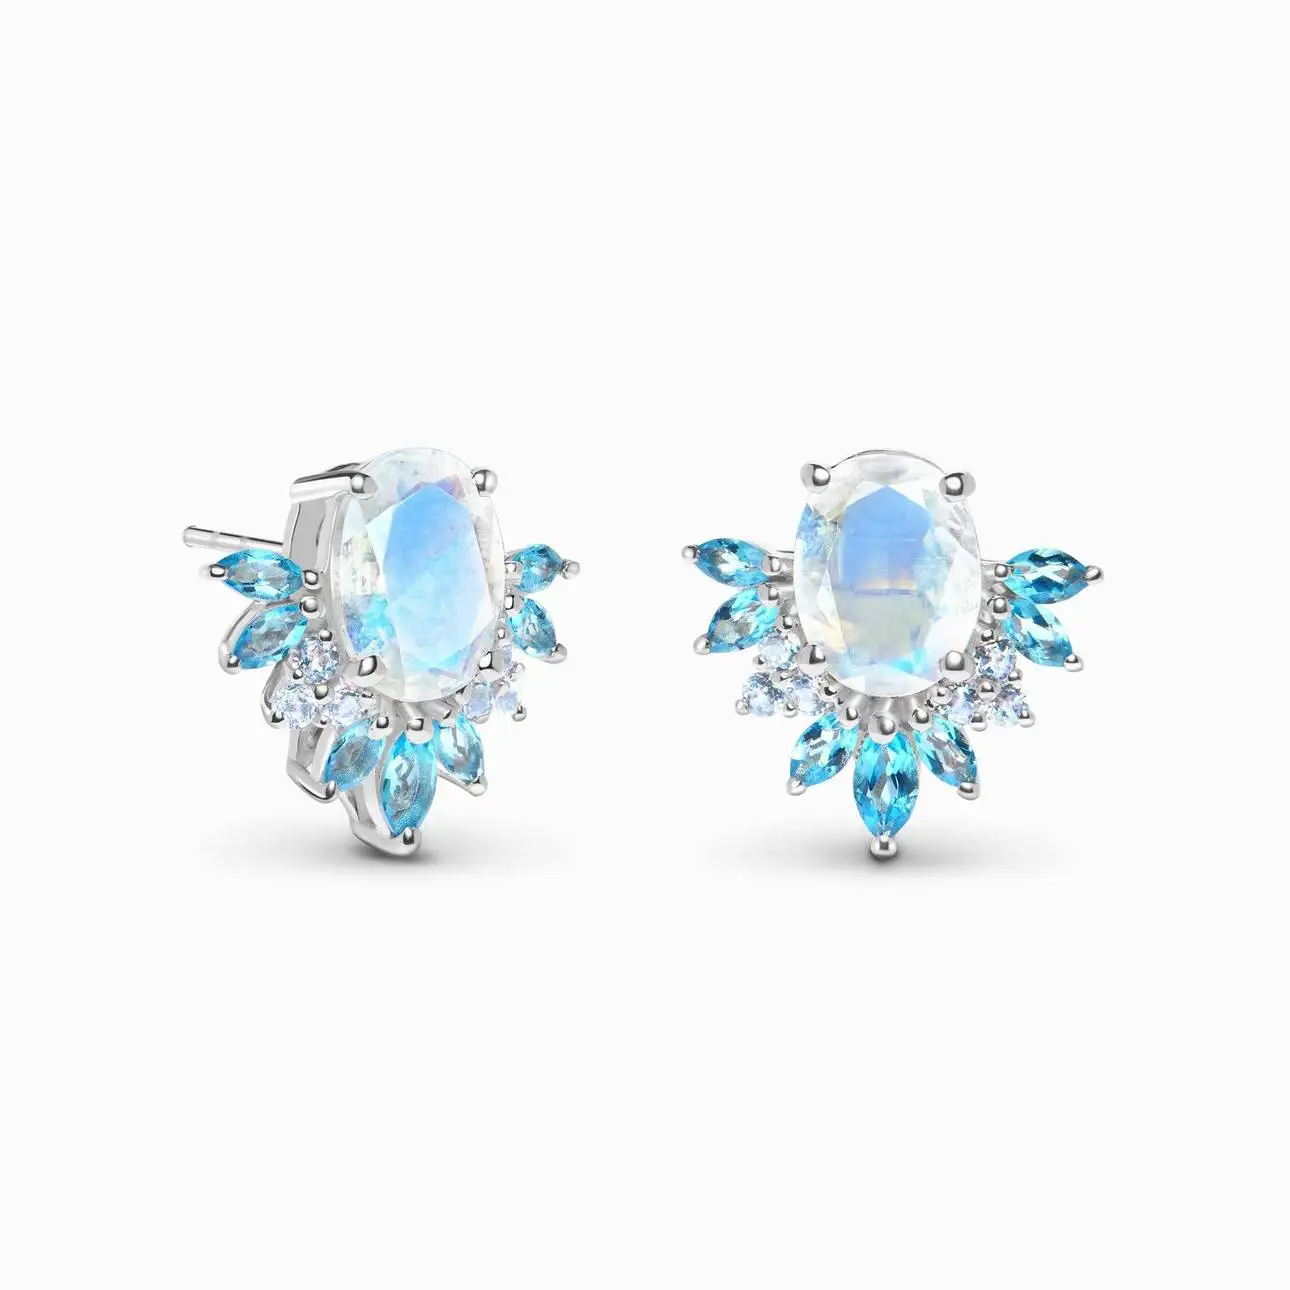 

Milliedition new arrival beautiful blue opal moonstone crystal stud earrings, Picture shows